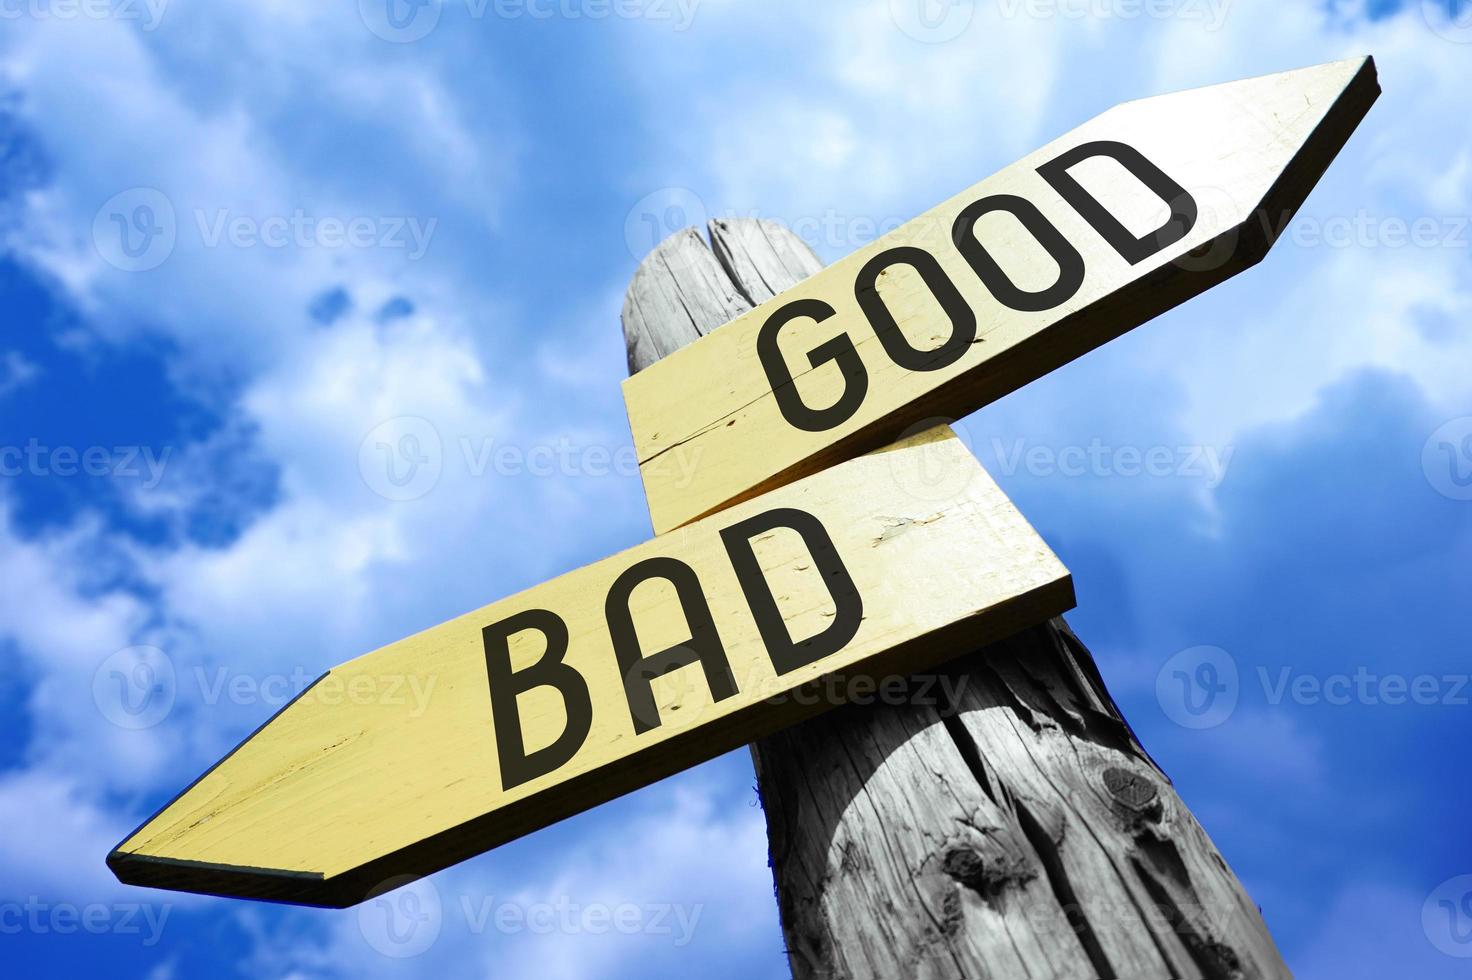 Good, Bad - Wooden Signpost with Two Arrows and Sky in Background photo